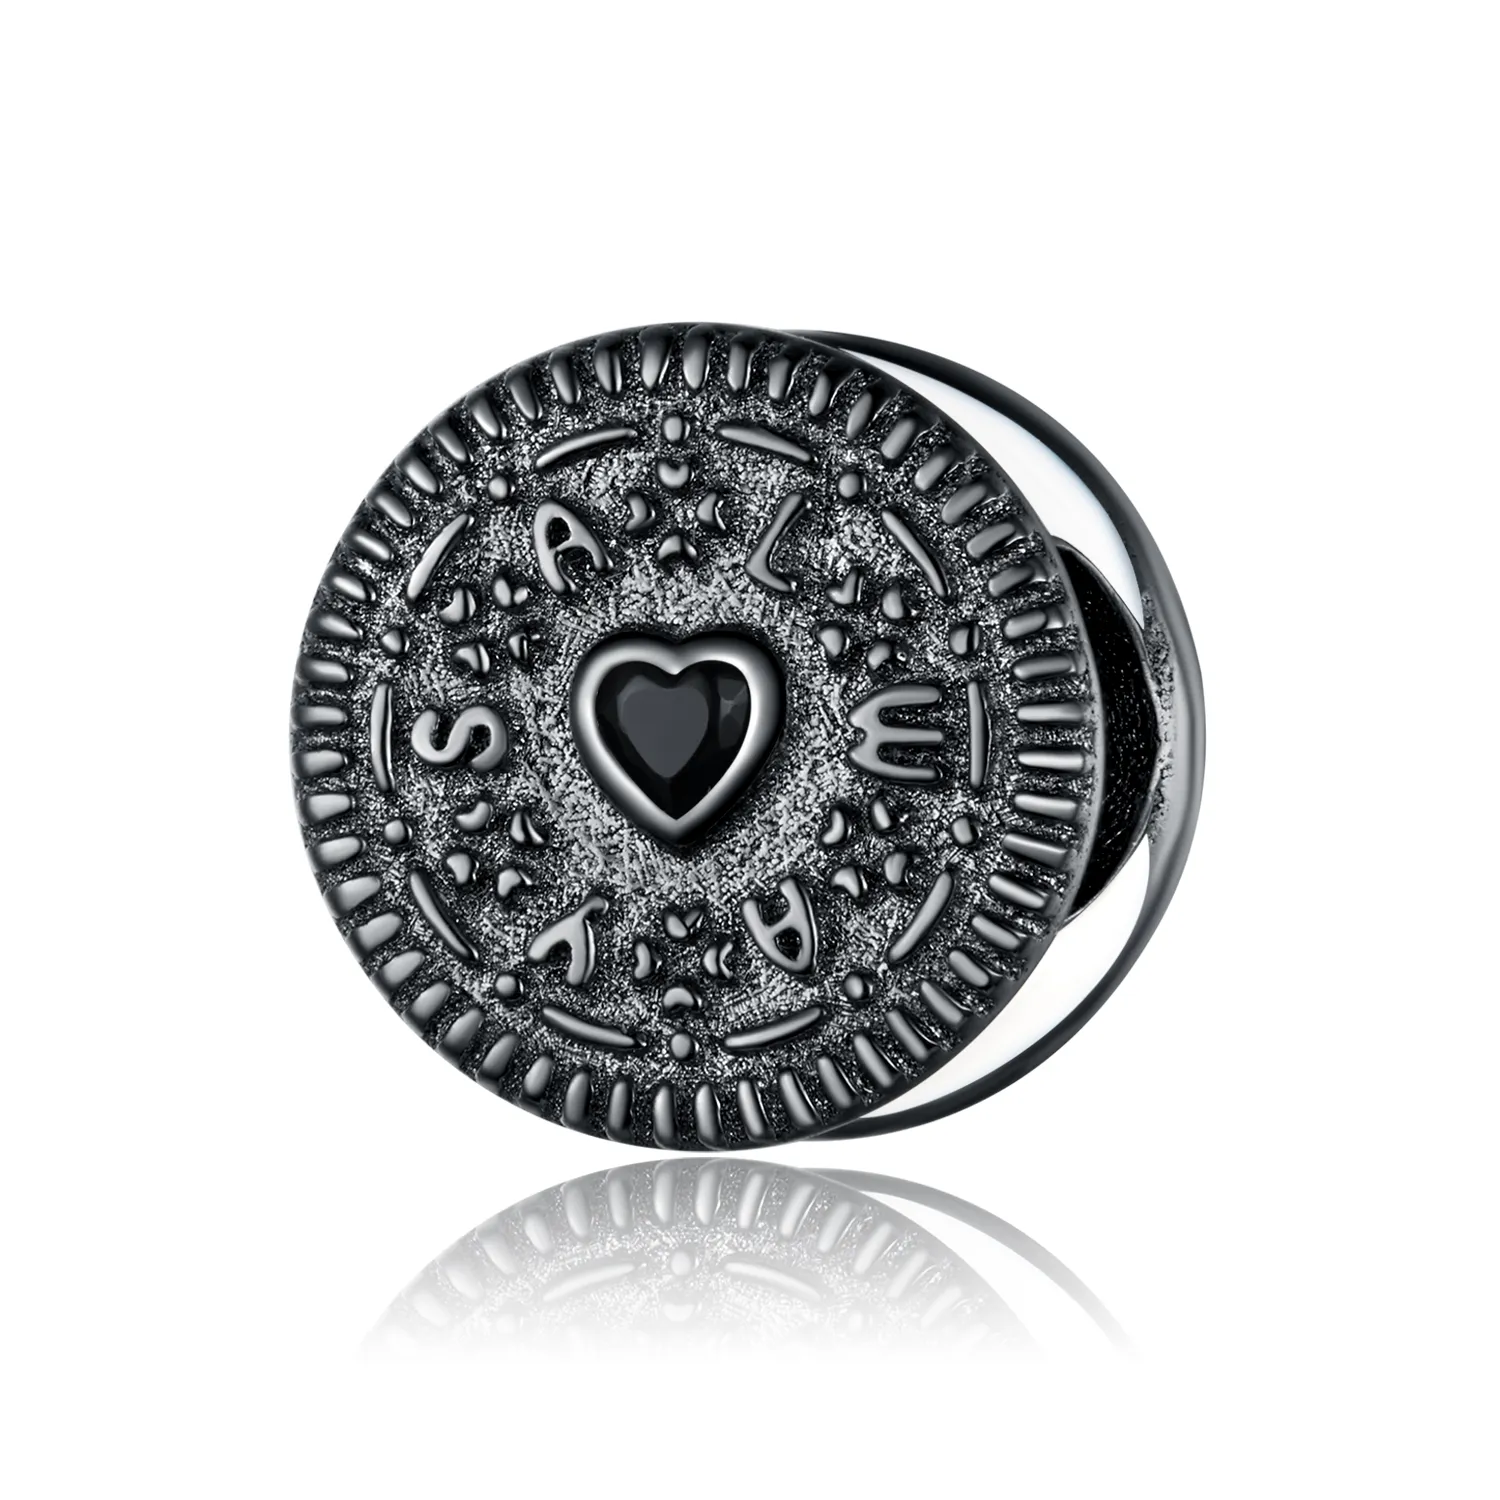 Pandora Style Silver Sndwich Biscuit Charm - BSC352